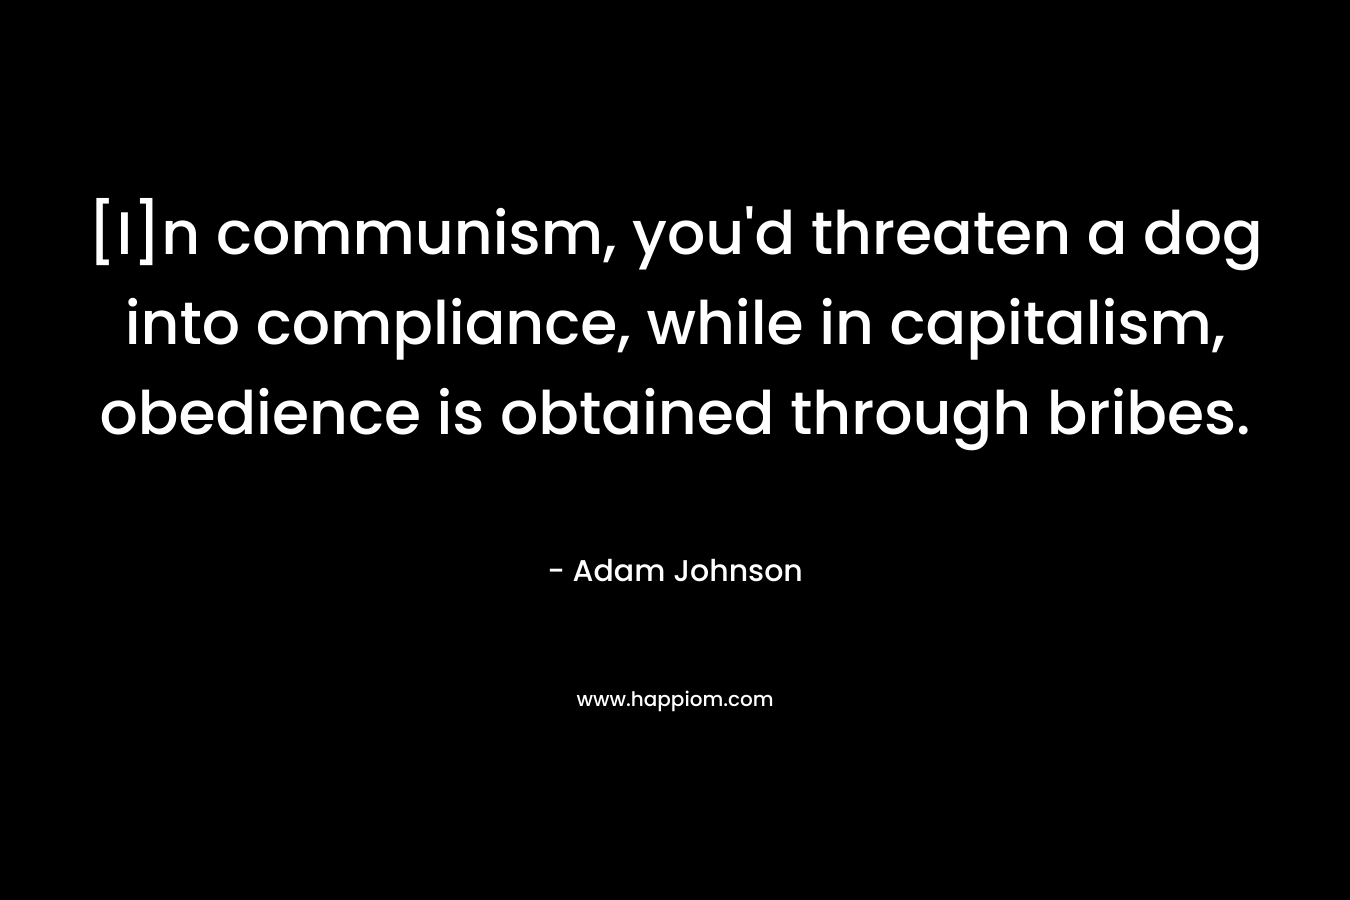 [I]n communism, you’d threaten a dog into compliance, while in capitalism, obedience is obtained through bribes. – Adam Johnson